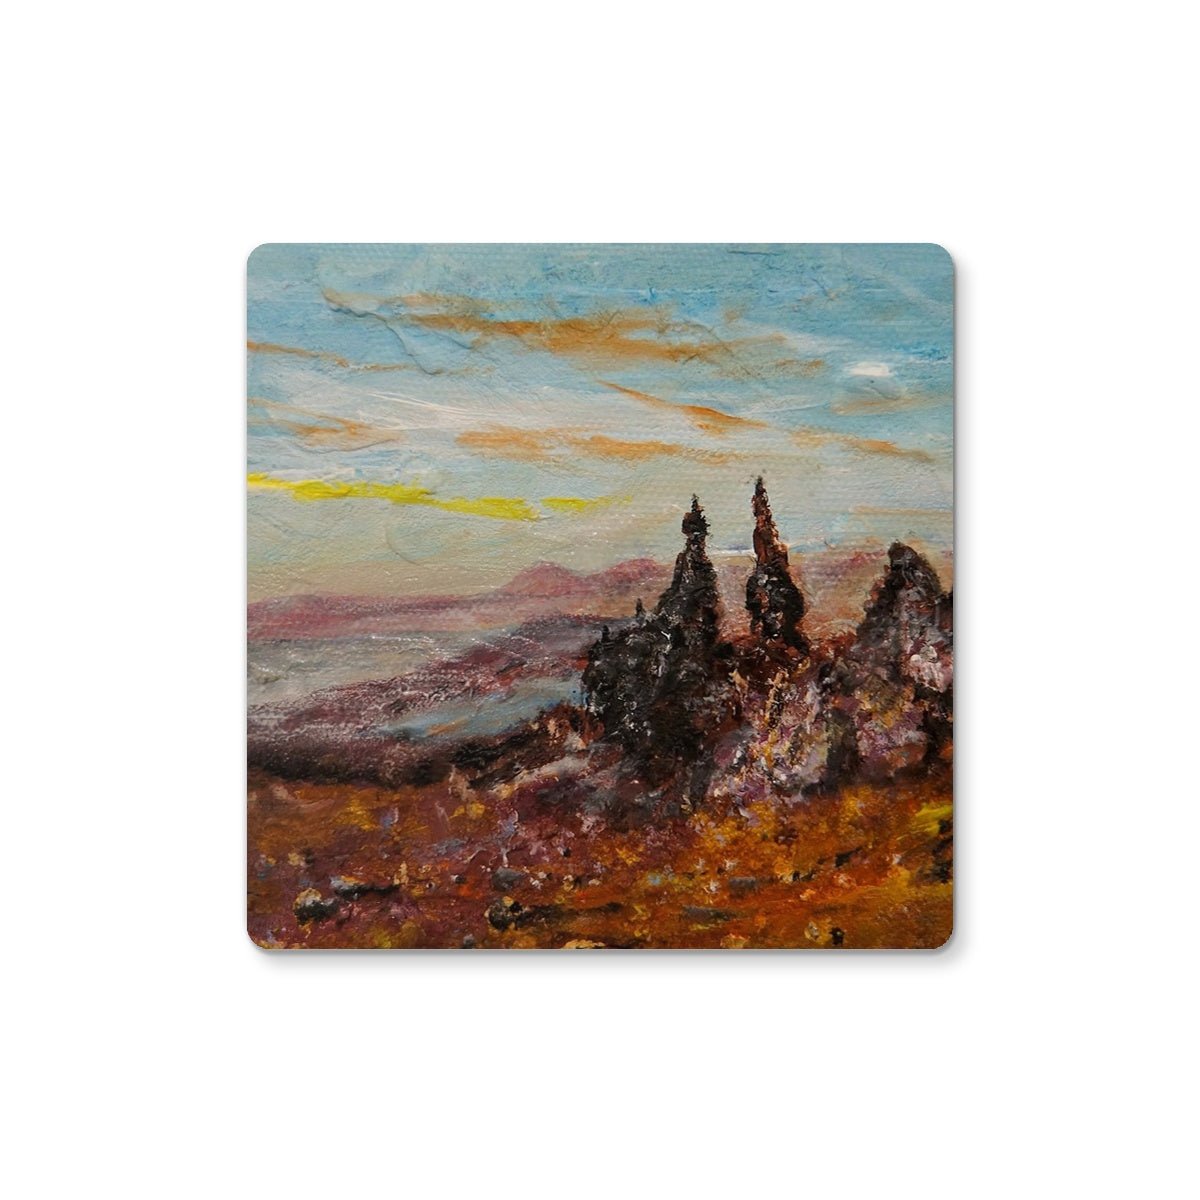 The Old Man Of Storr Skye Art Gifts Coaster-Coasters-Skye Art Gallery-6 Coasters-Paintings, Prints, Homeware, Art Gifts From Scotland By Scottish Artist Kevin Hunter